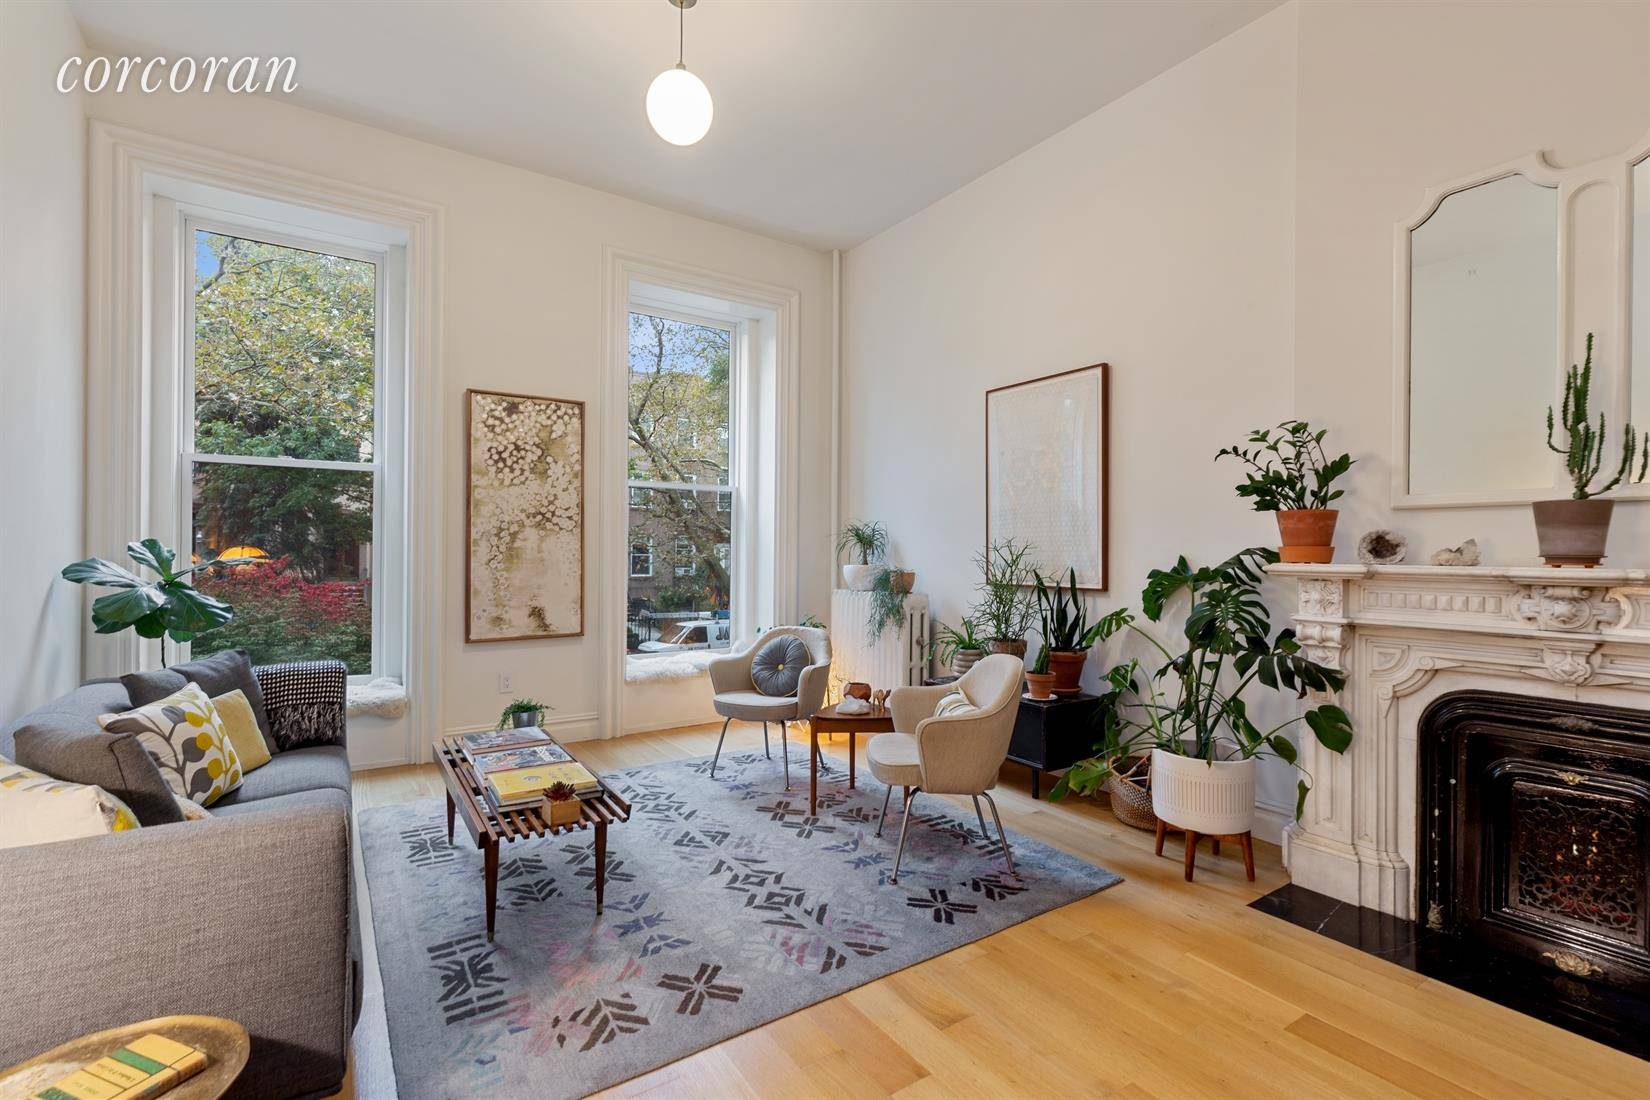 Located on the parlor floor of a 25' wide brownstone on one of the most beautiful blocks in Carroll Gardens, this gorgeously renovated two bedroom home is an absolute stunner.